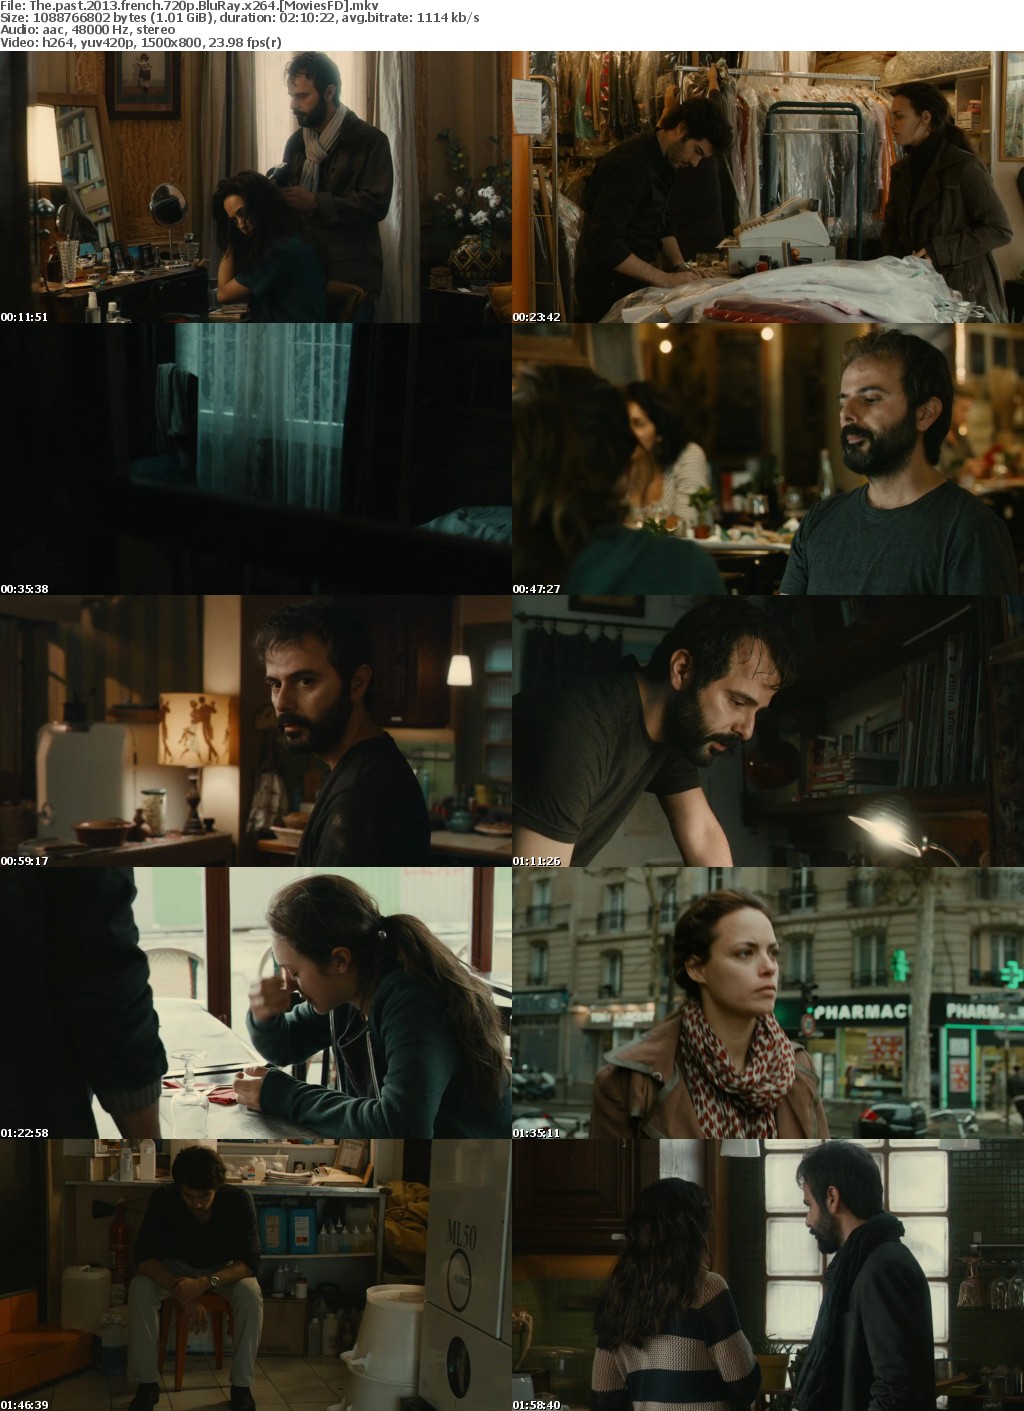 The Past (2013) French 720p BluRay x264 - MoviesFD